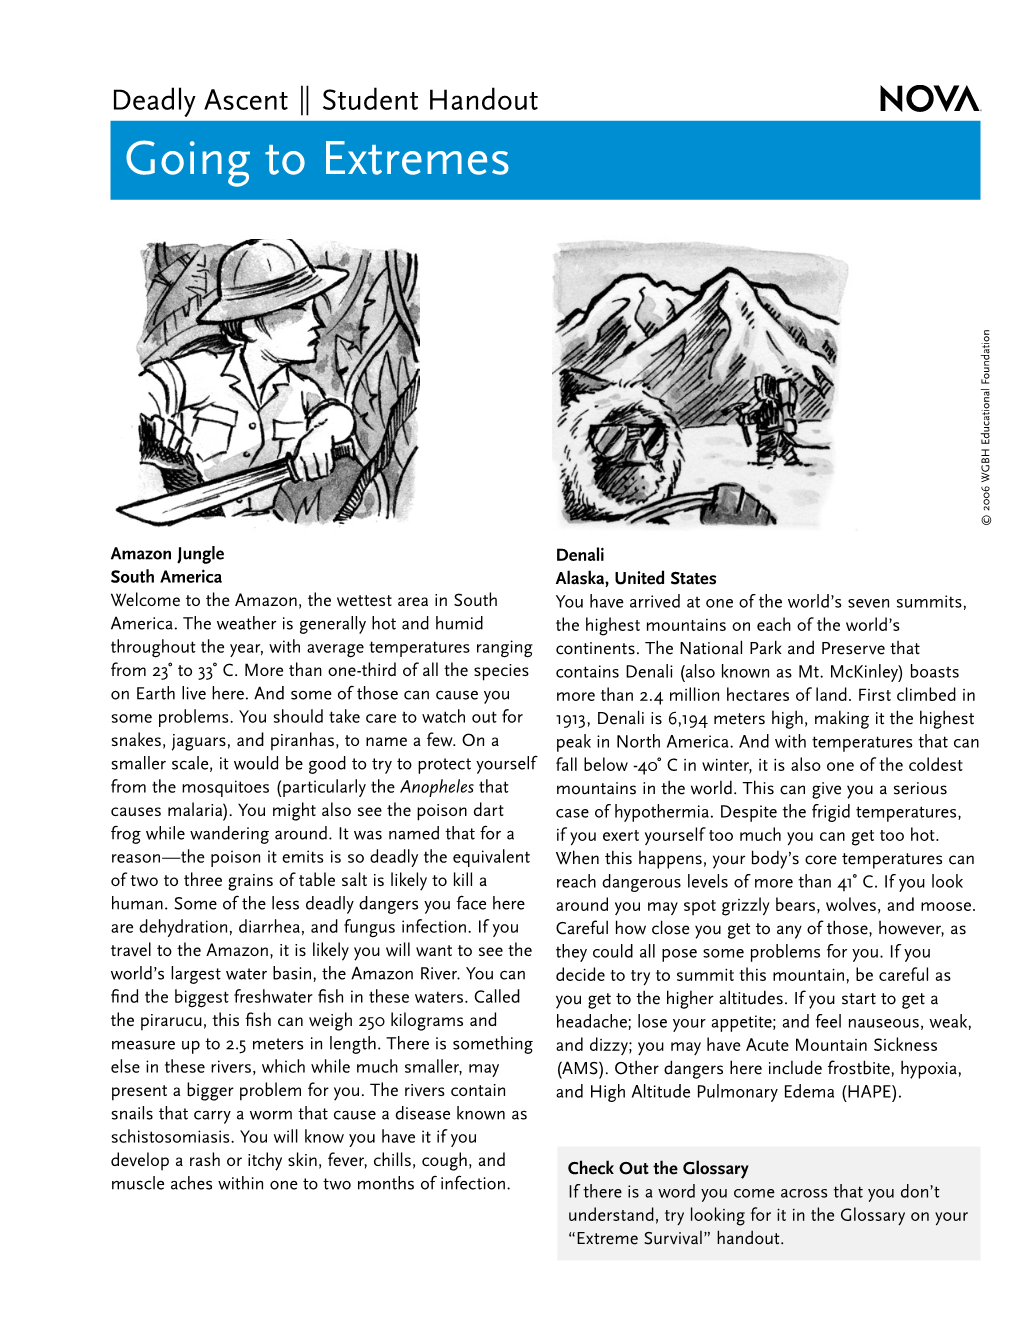 Going to Extremes © 2006 WGBH Educational Foundation